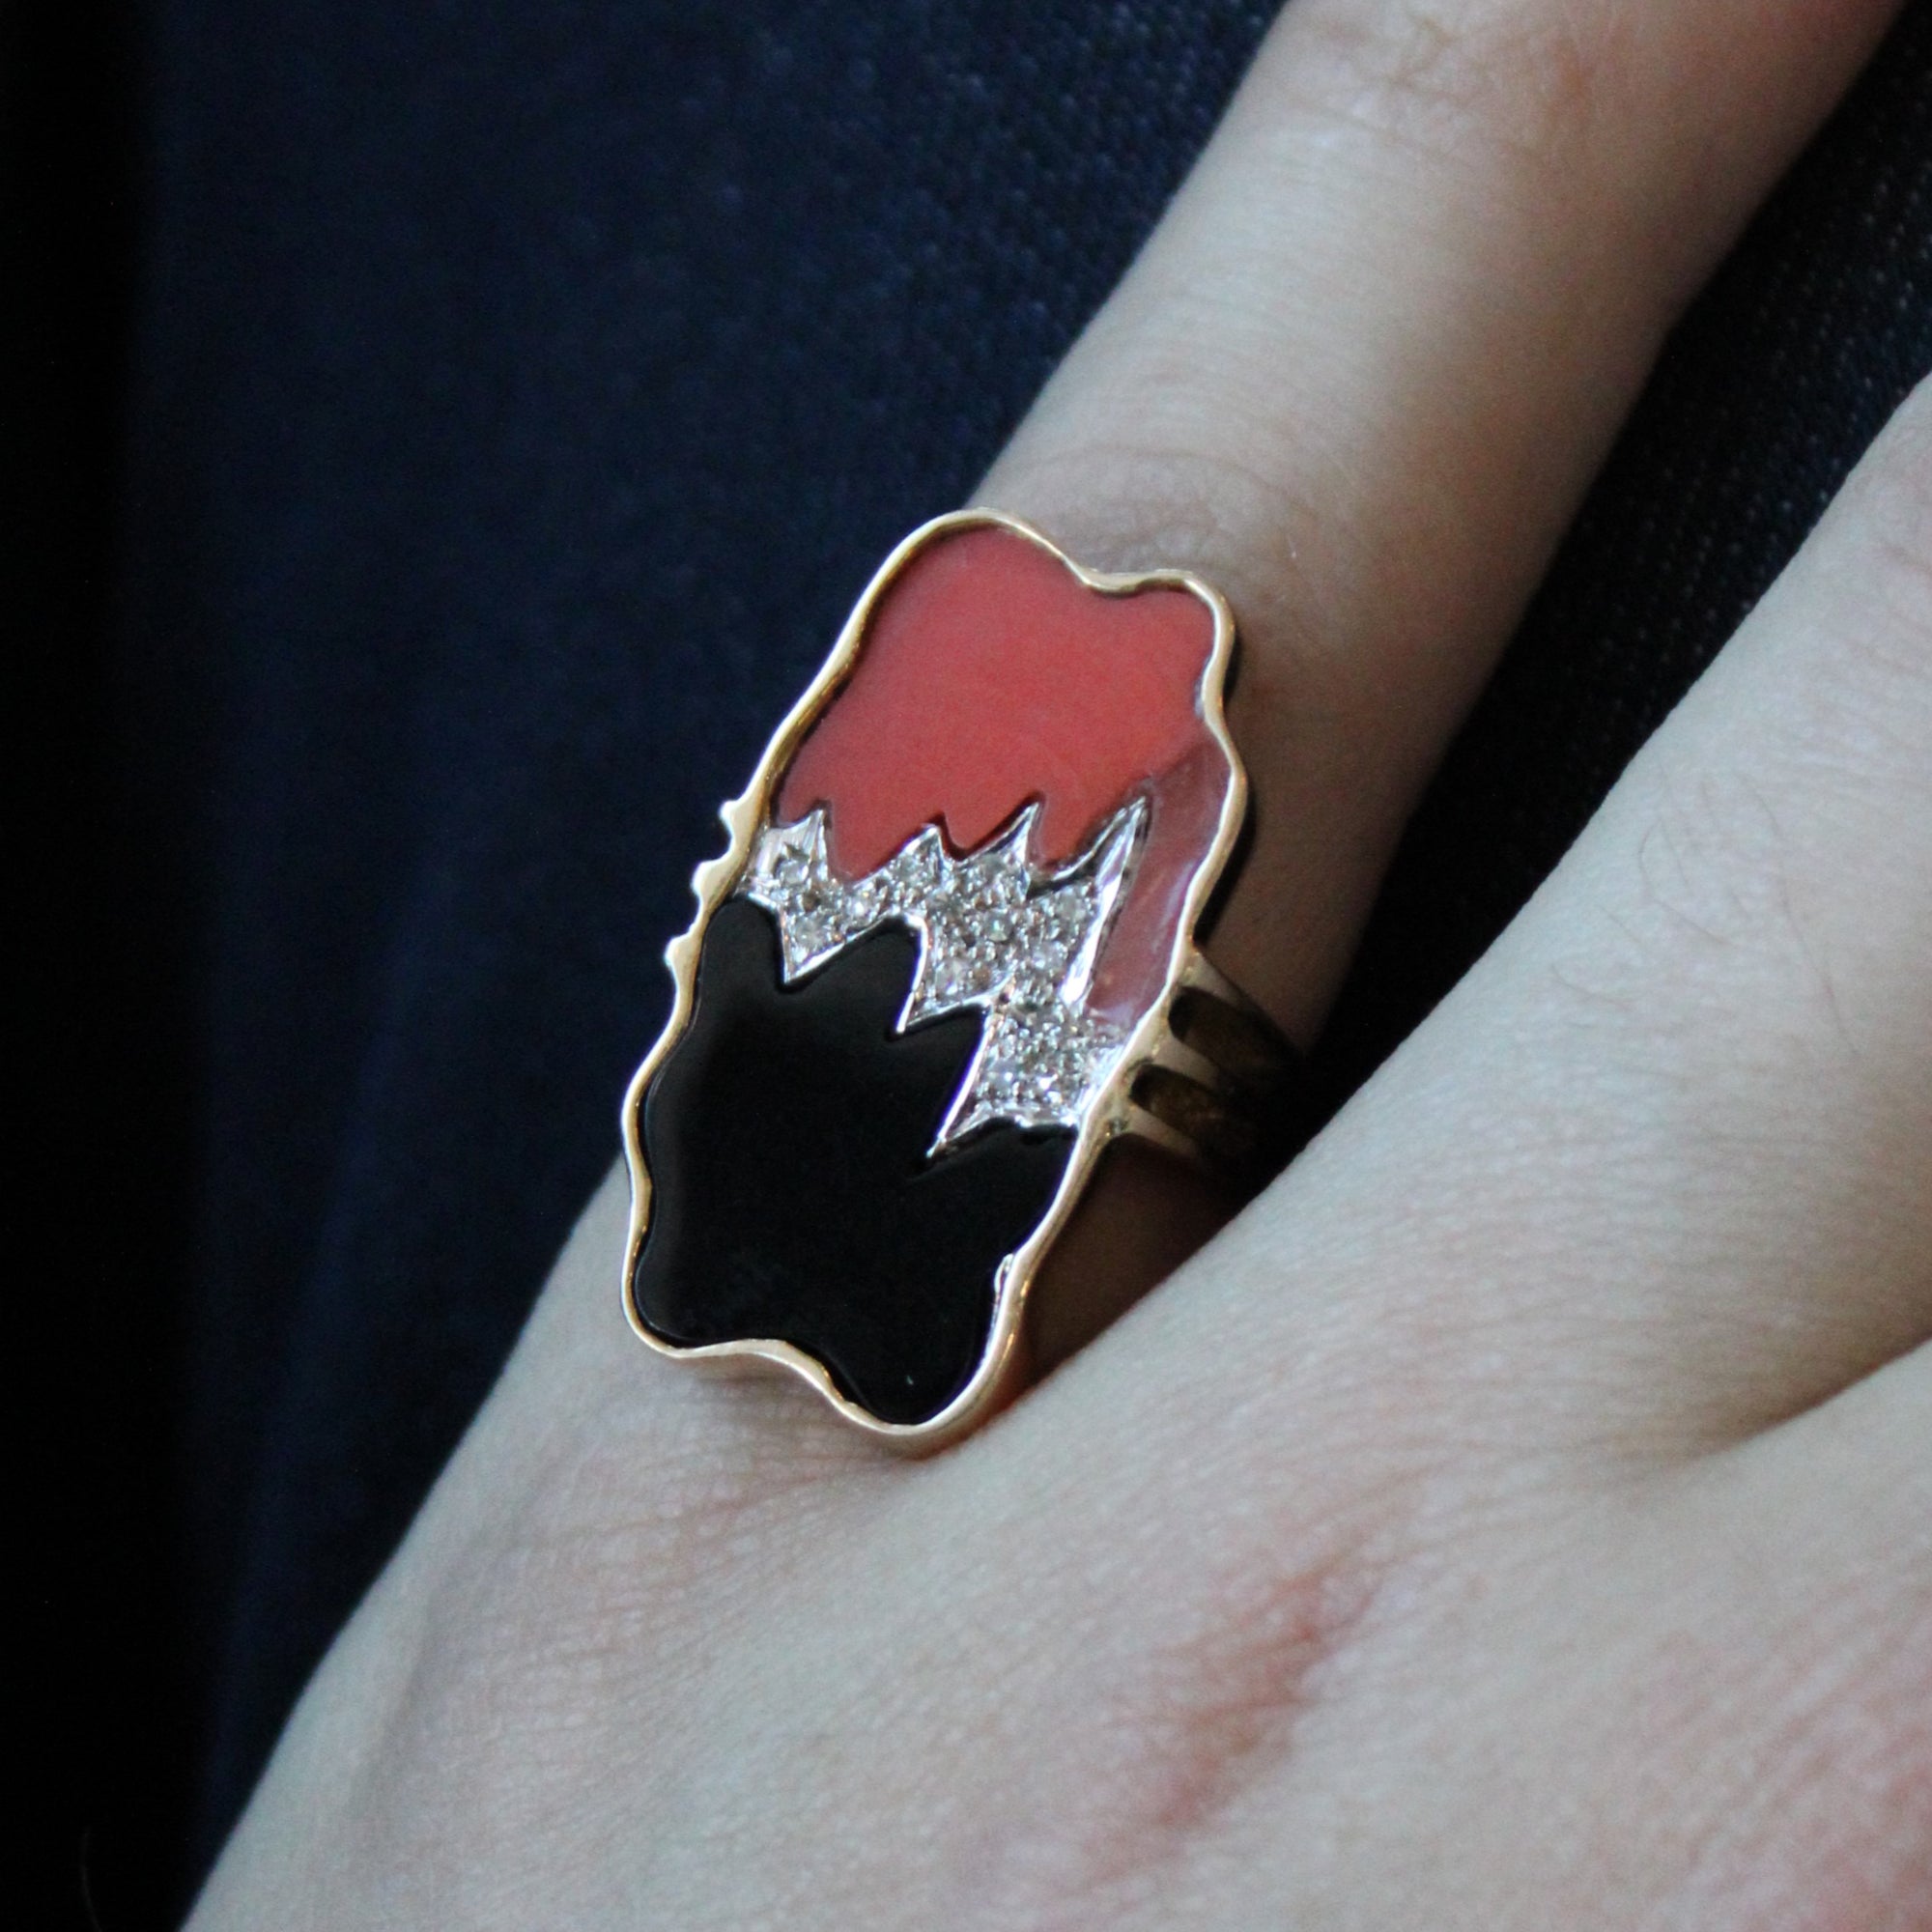 Abstract Coral & Onyx Cocktail Ring | 3.50ctw, 0.14ctw | SZ 5.25 |